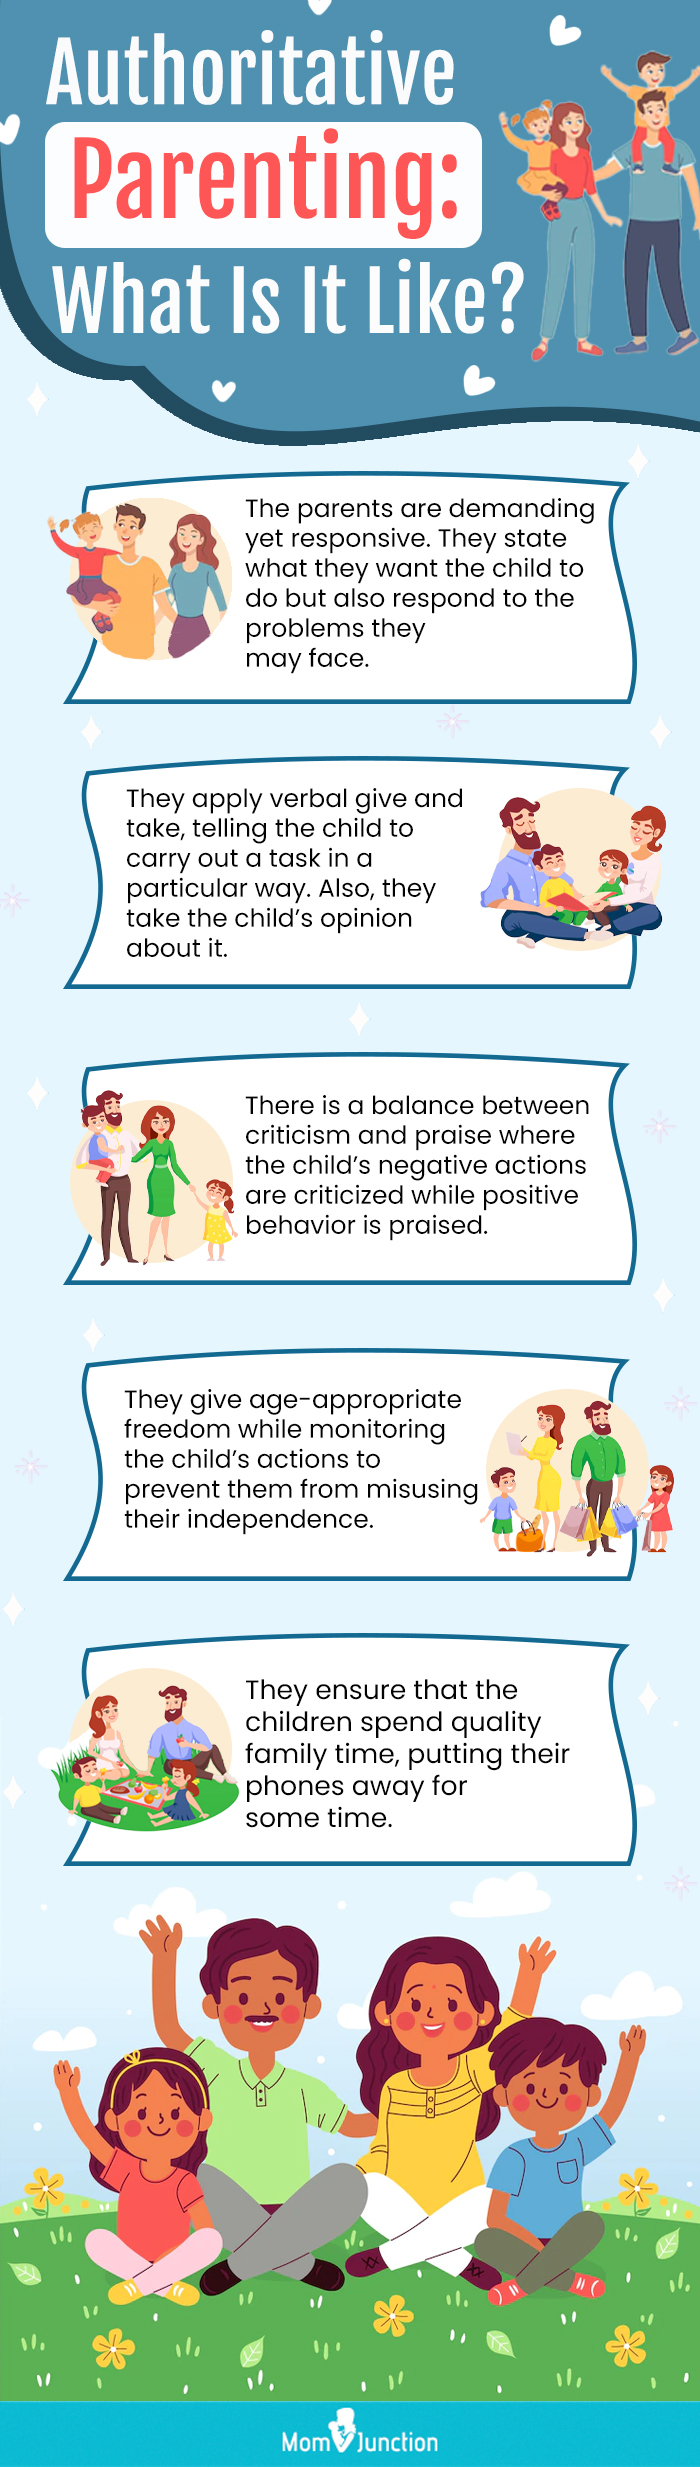 authoritative parenting what is it like (infographic)